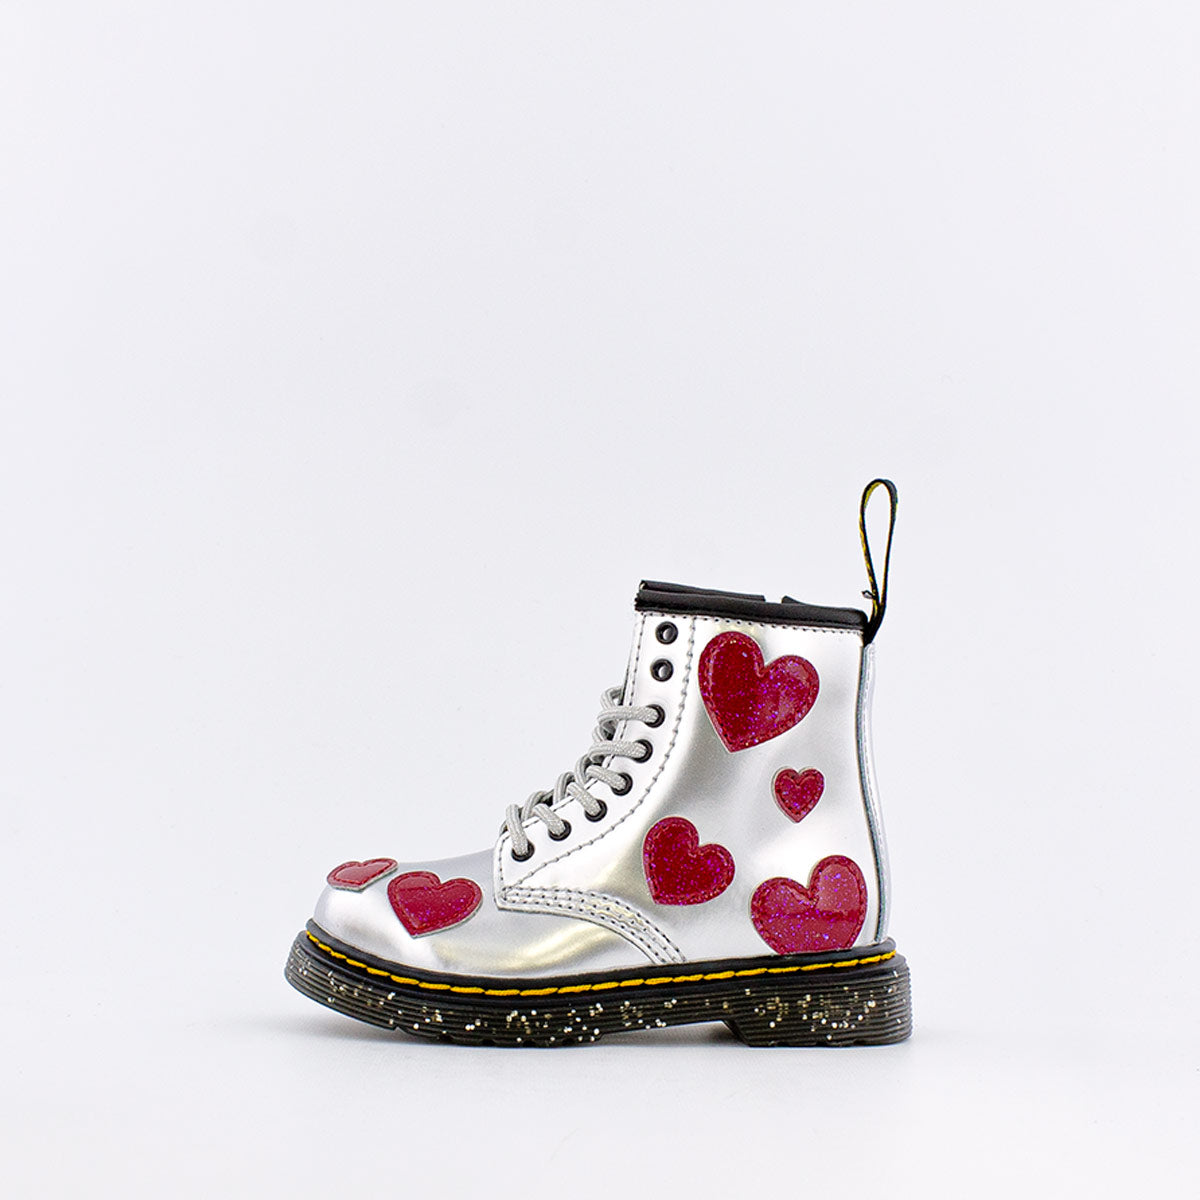 Dr. Martens 1460 Glitter Heart Patent Lace Up Boots (Infant/Toddler)